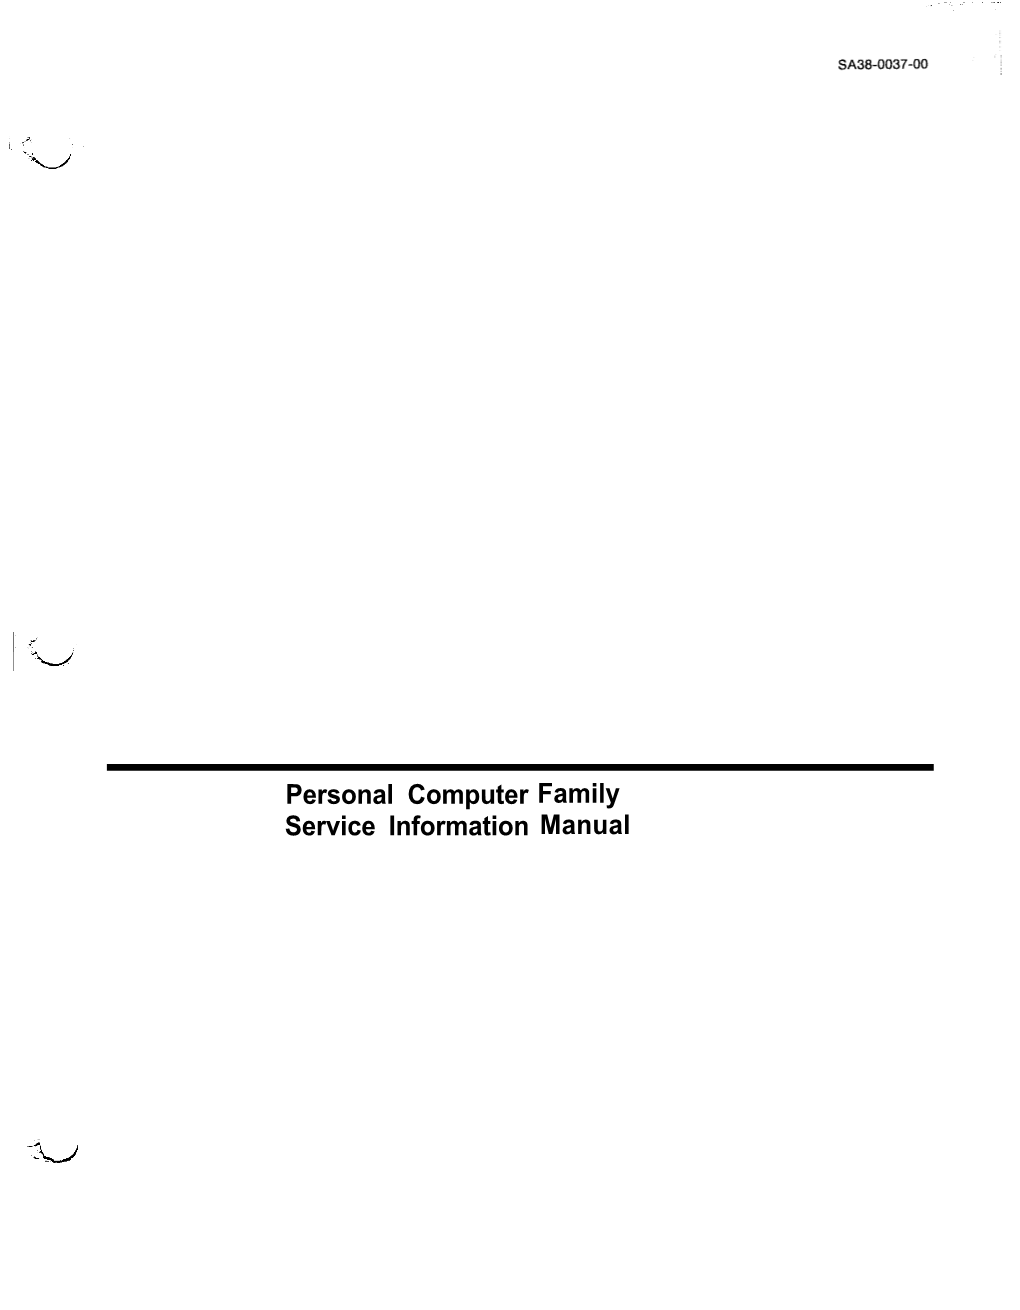 Personal Computer Family Service Information Manual Preface